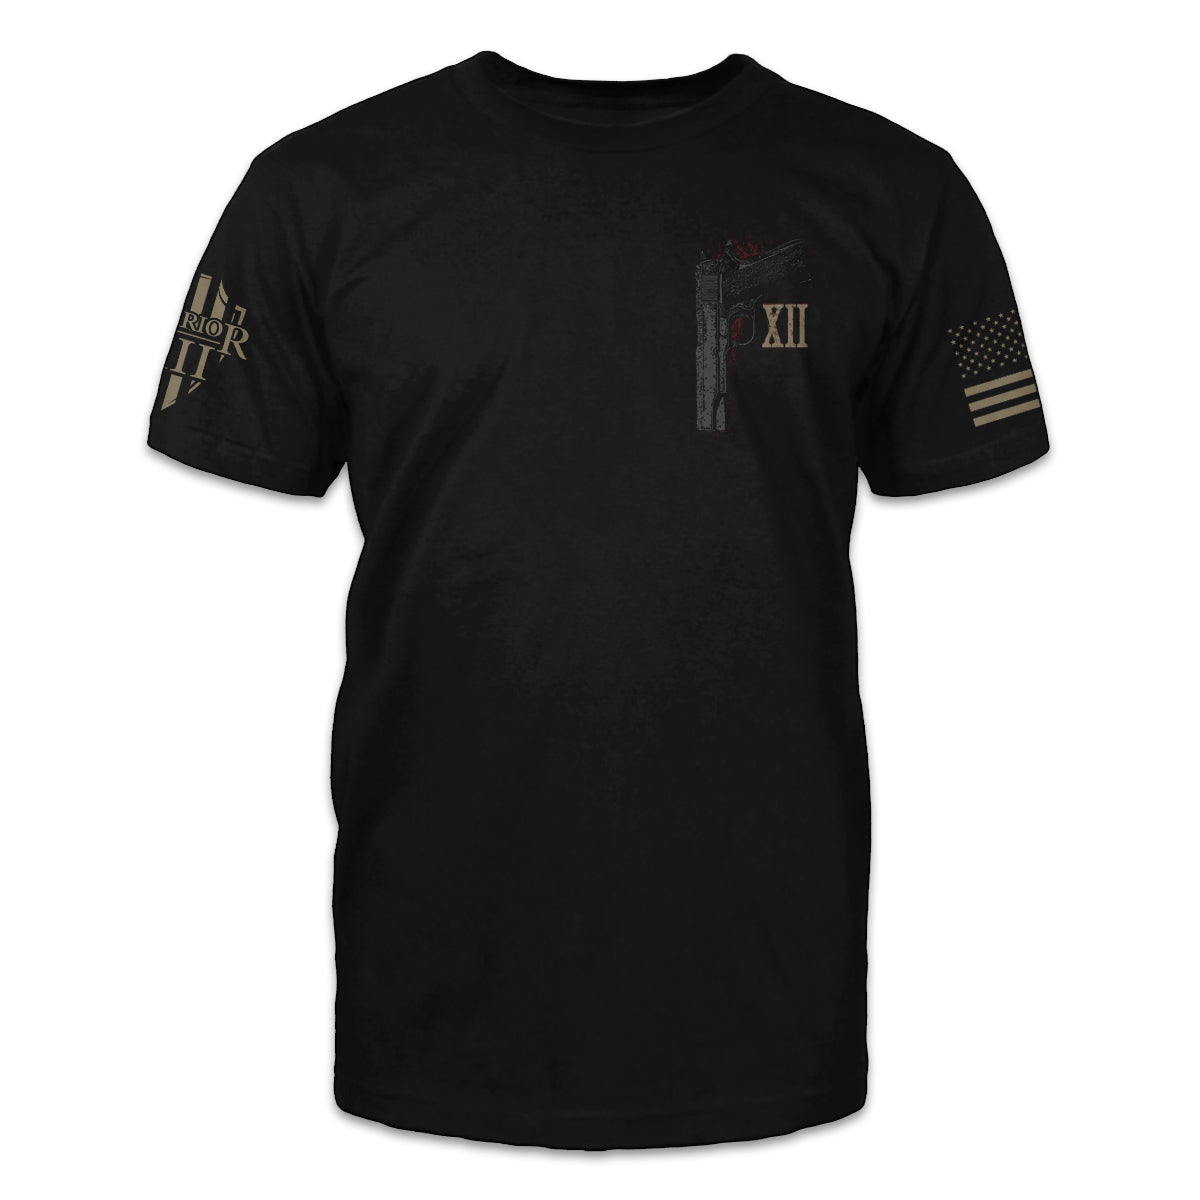 A black t-shirt with a pistol printed on the front.